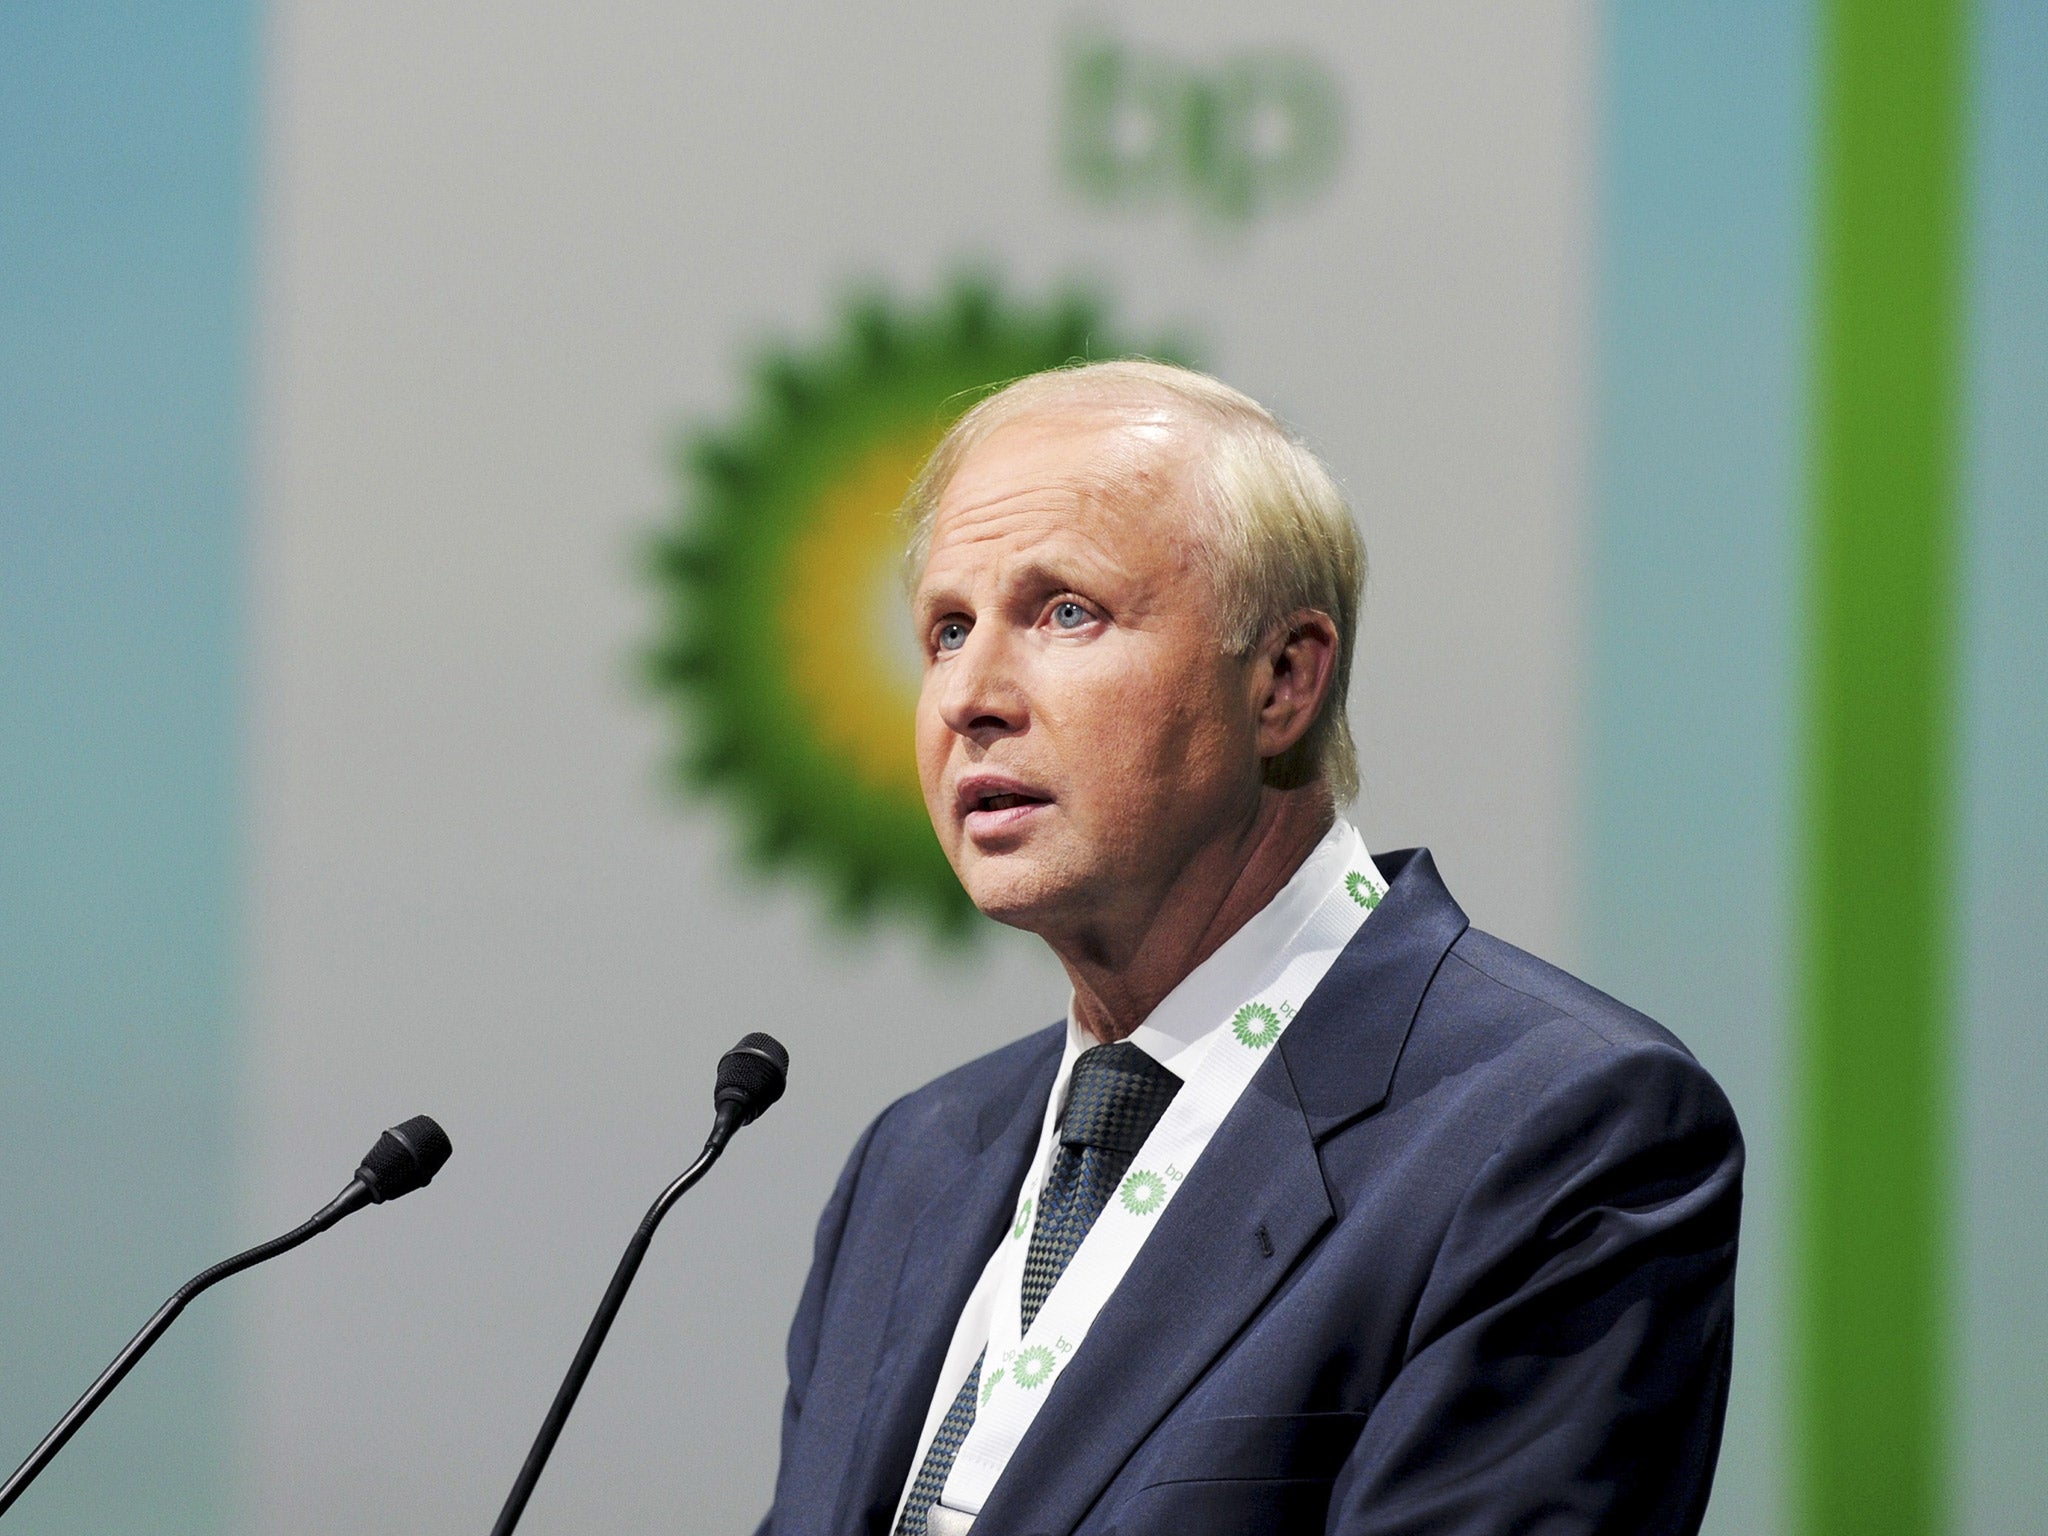 BP Chief Executive Officer Bob Dudley said he expected global oil supply and demand to balance towards the end of the year